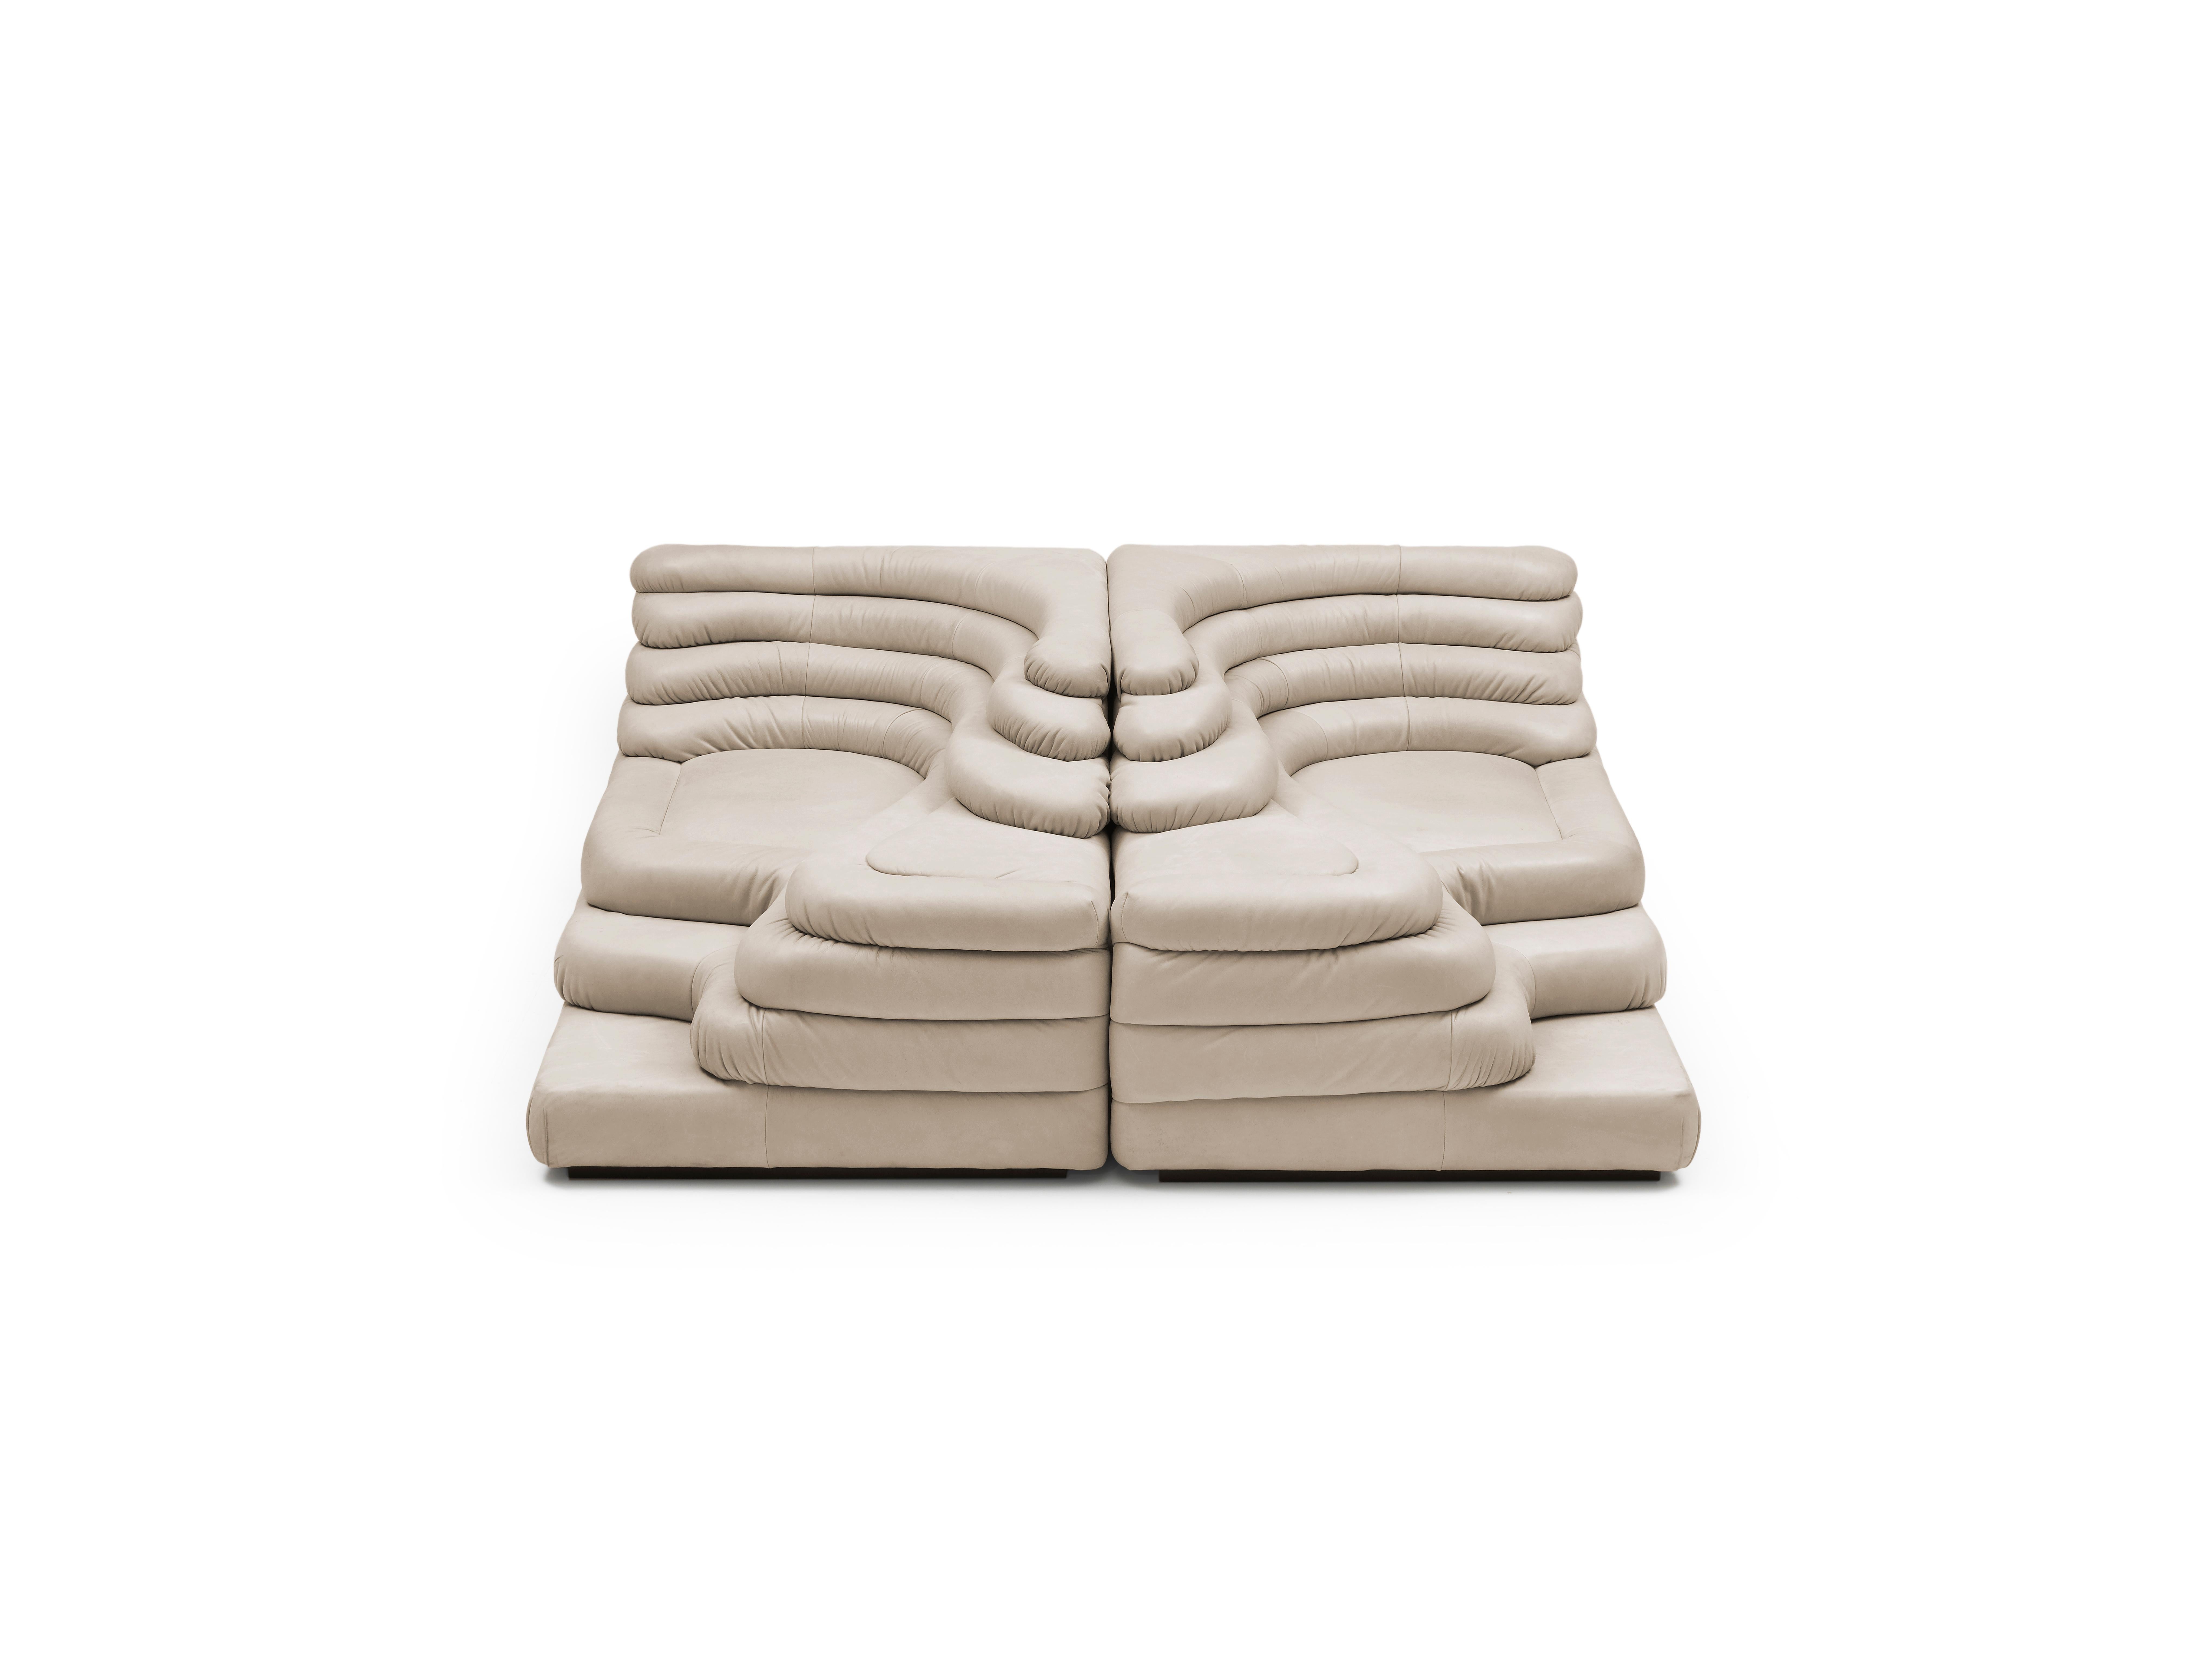 DS-1025 set of 2 sofas by De Sede
Design: Ubald Klug
Dimensions: Left: D 91 x W 156 x H 70 cm, right D 91 x W 156 x H 38 cm
Materials: SEDEX upholstery with wadding cushion. Stable, compact frame made of beech and board material.

Prices may